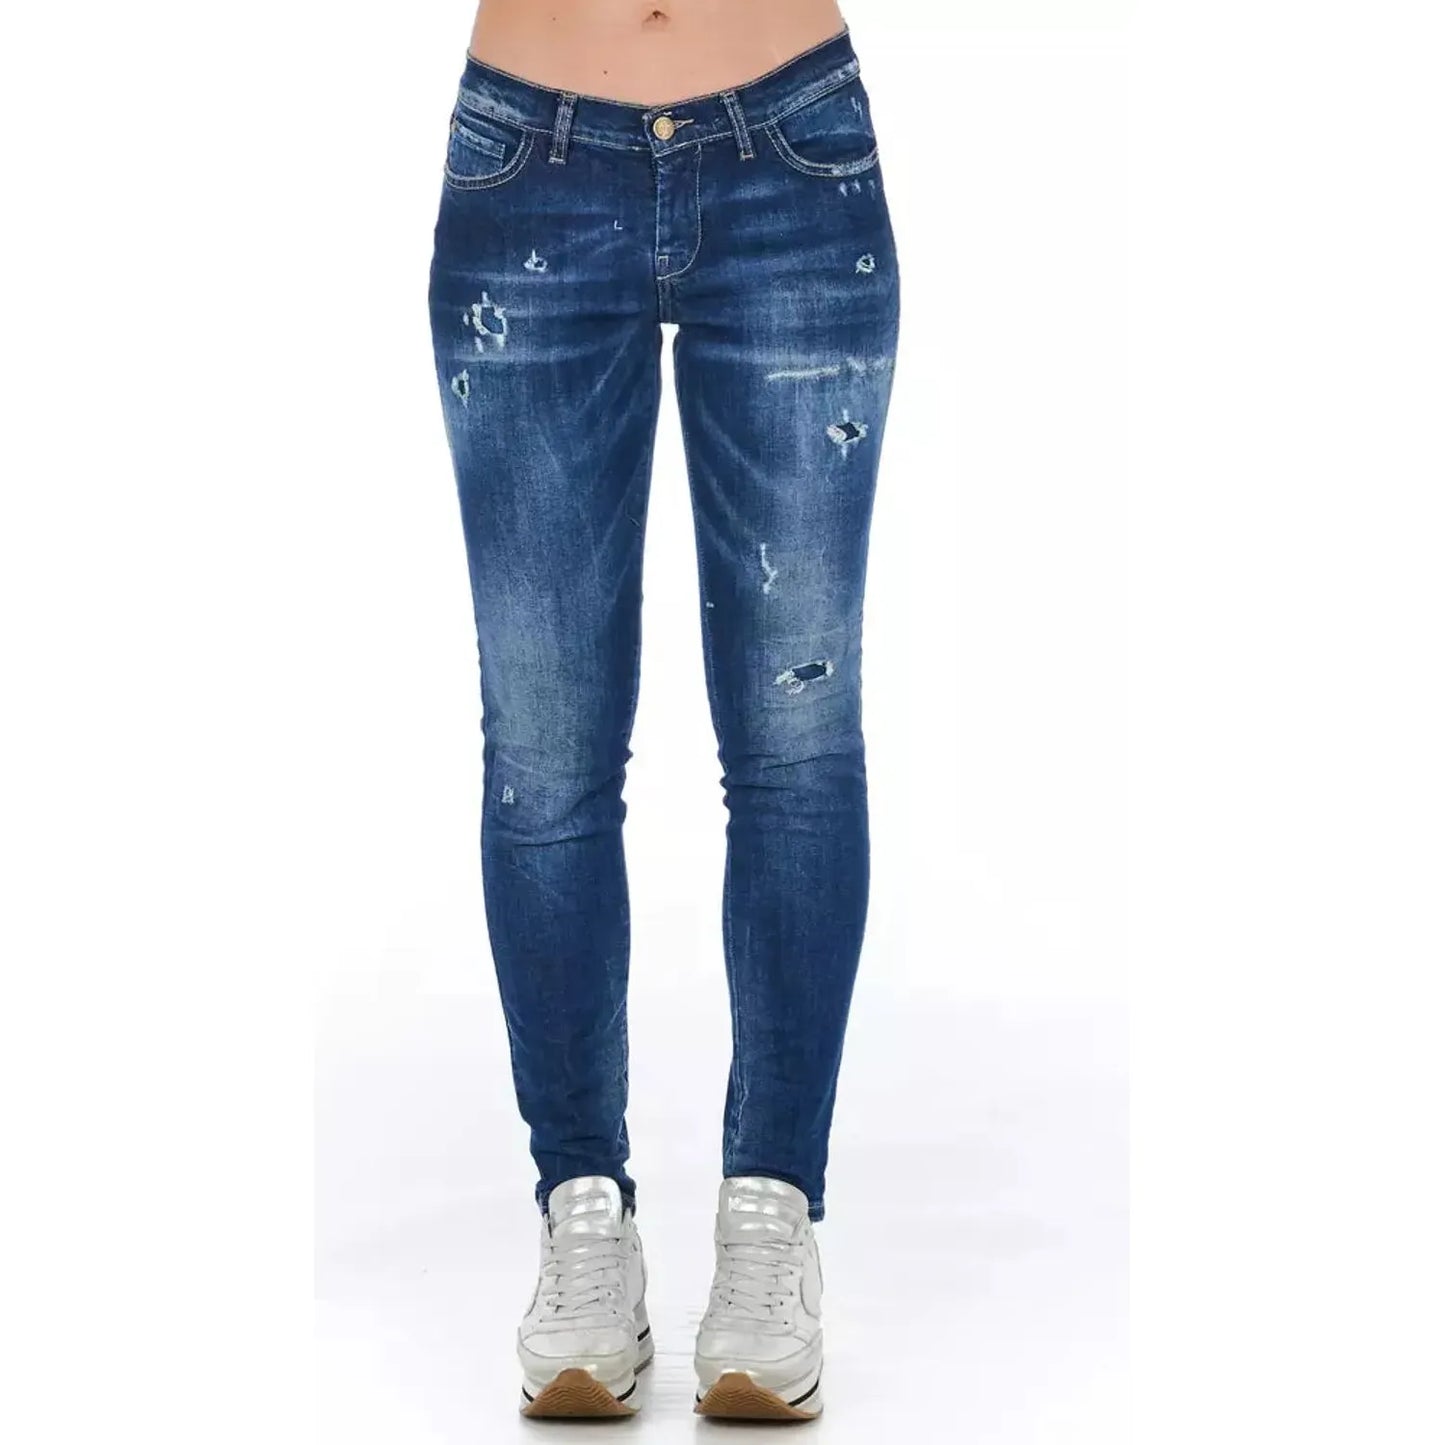 Frankie Morello Chic Worn Wash Skinny Denim Jeans blue-cotton-jeans-pant-52 product-21764-2031546563-20-398aa321-f2f.webp